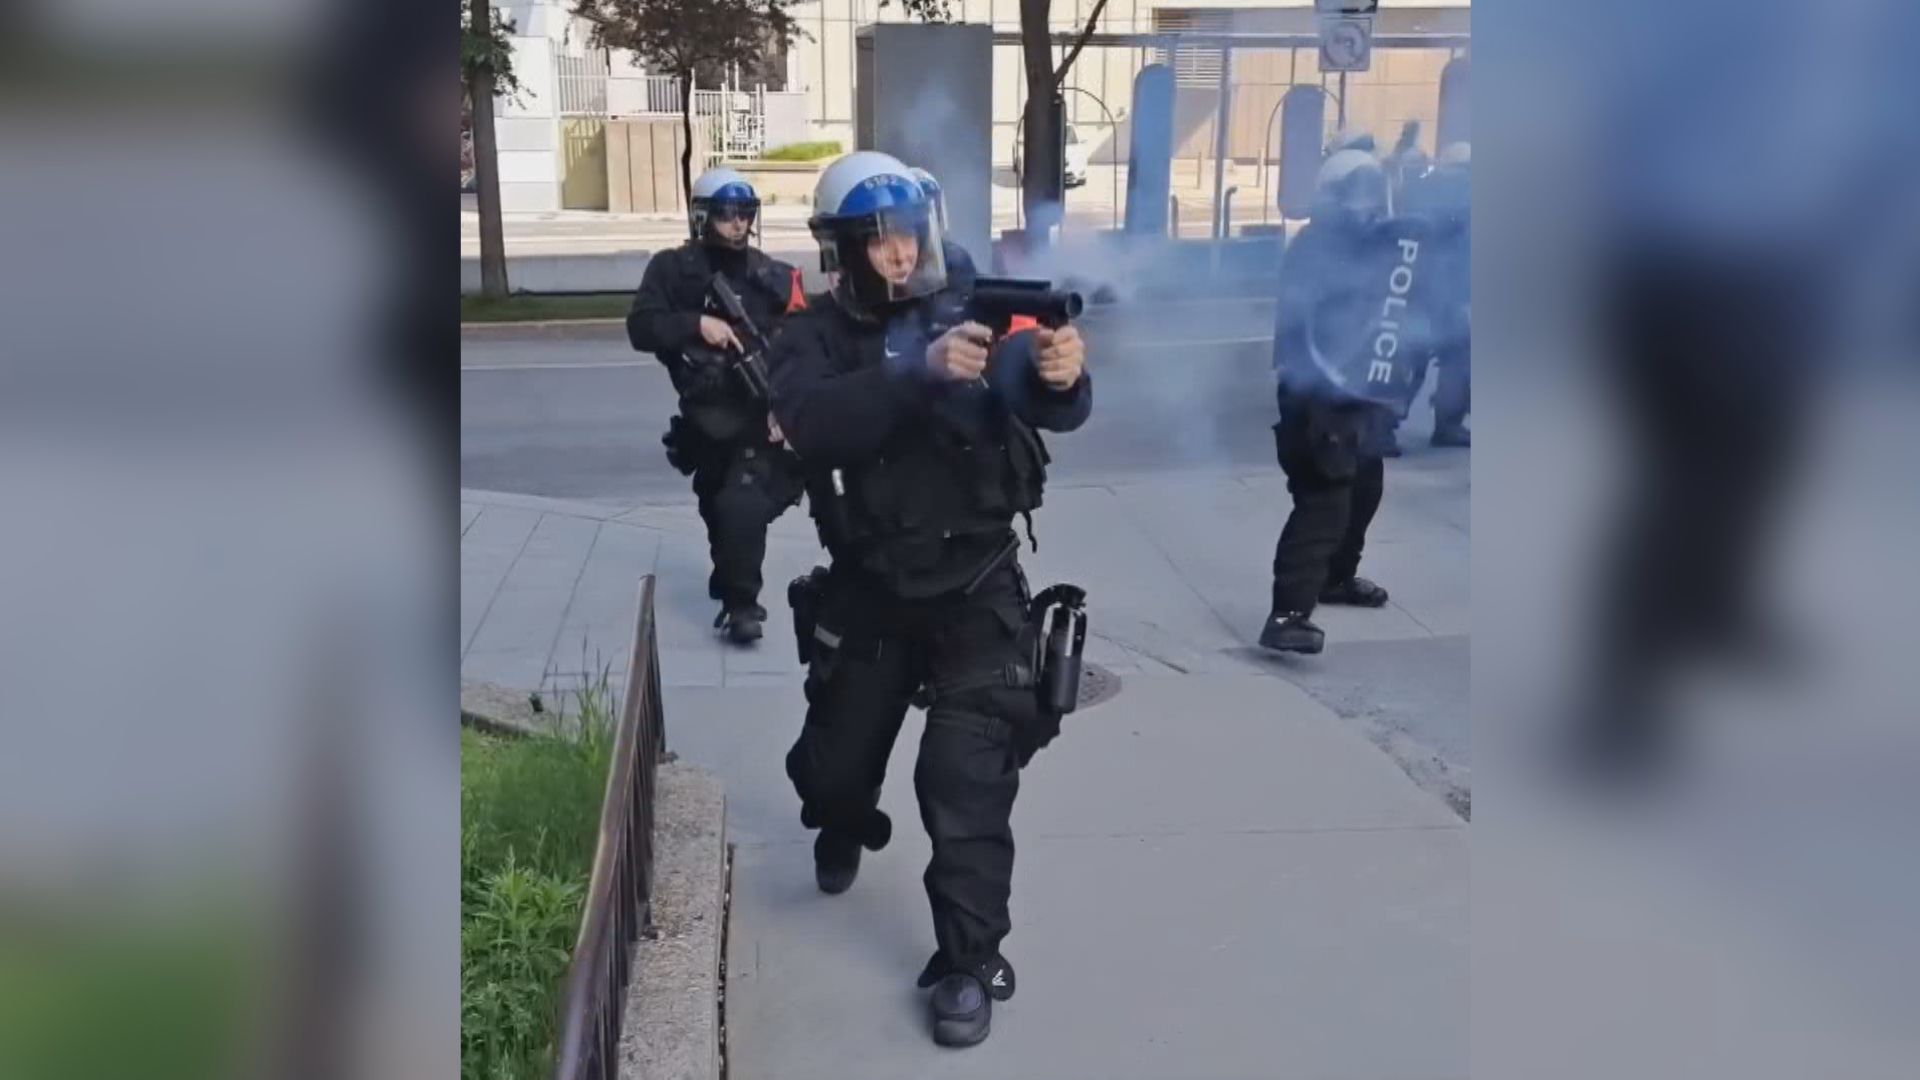 Montreal riot police use tear gas, batons to dismantle pro-Palestinian street protest